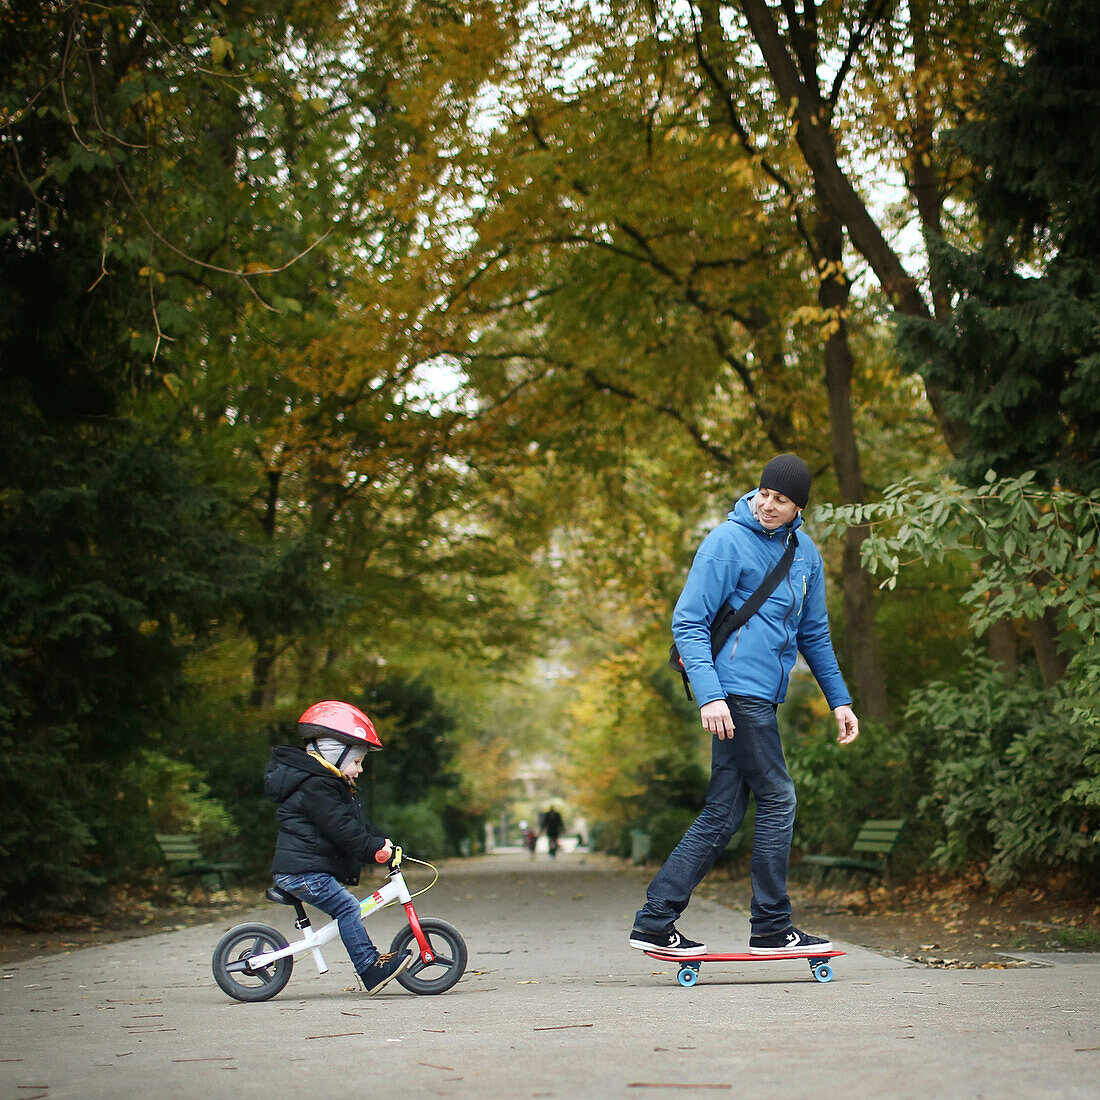 A 3 years old little boy on bike going with his father on skateboarding in a park